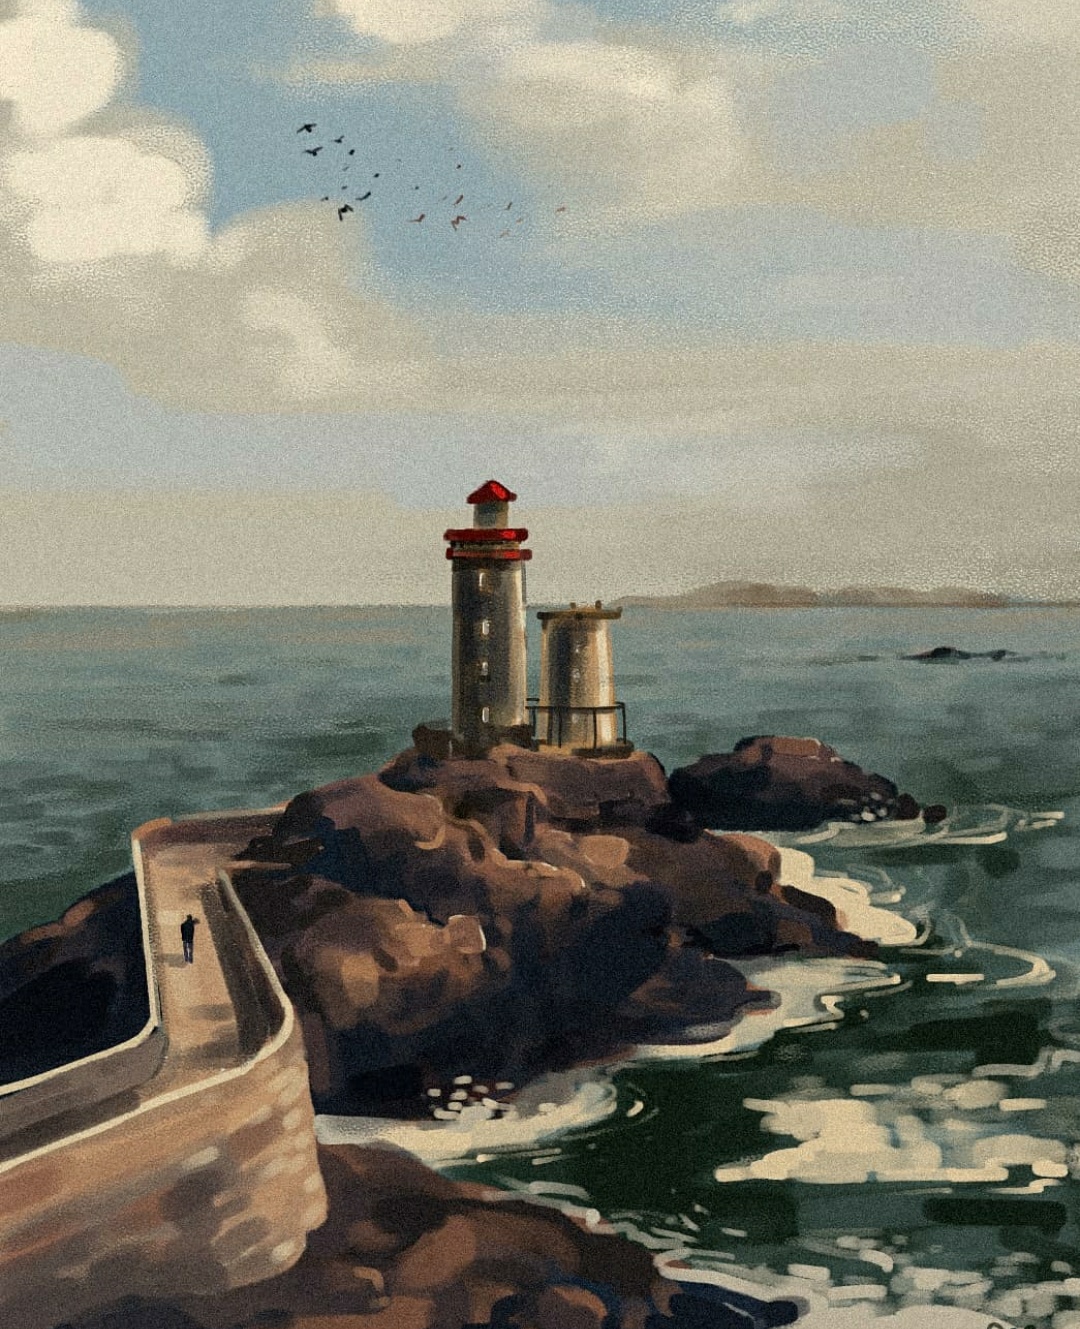 The lonely lighthouse